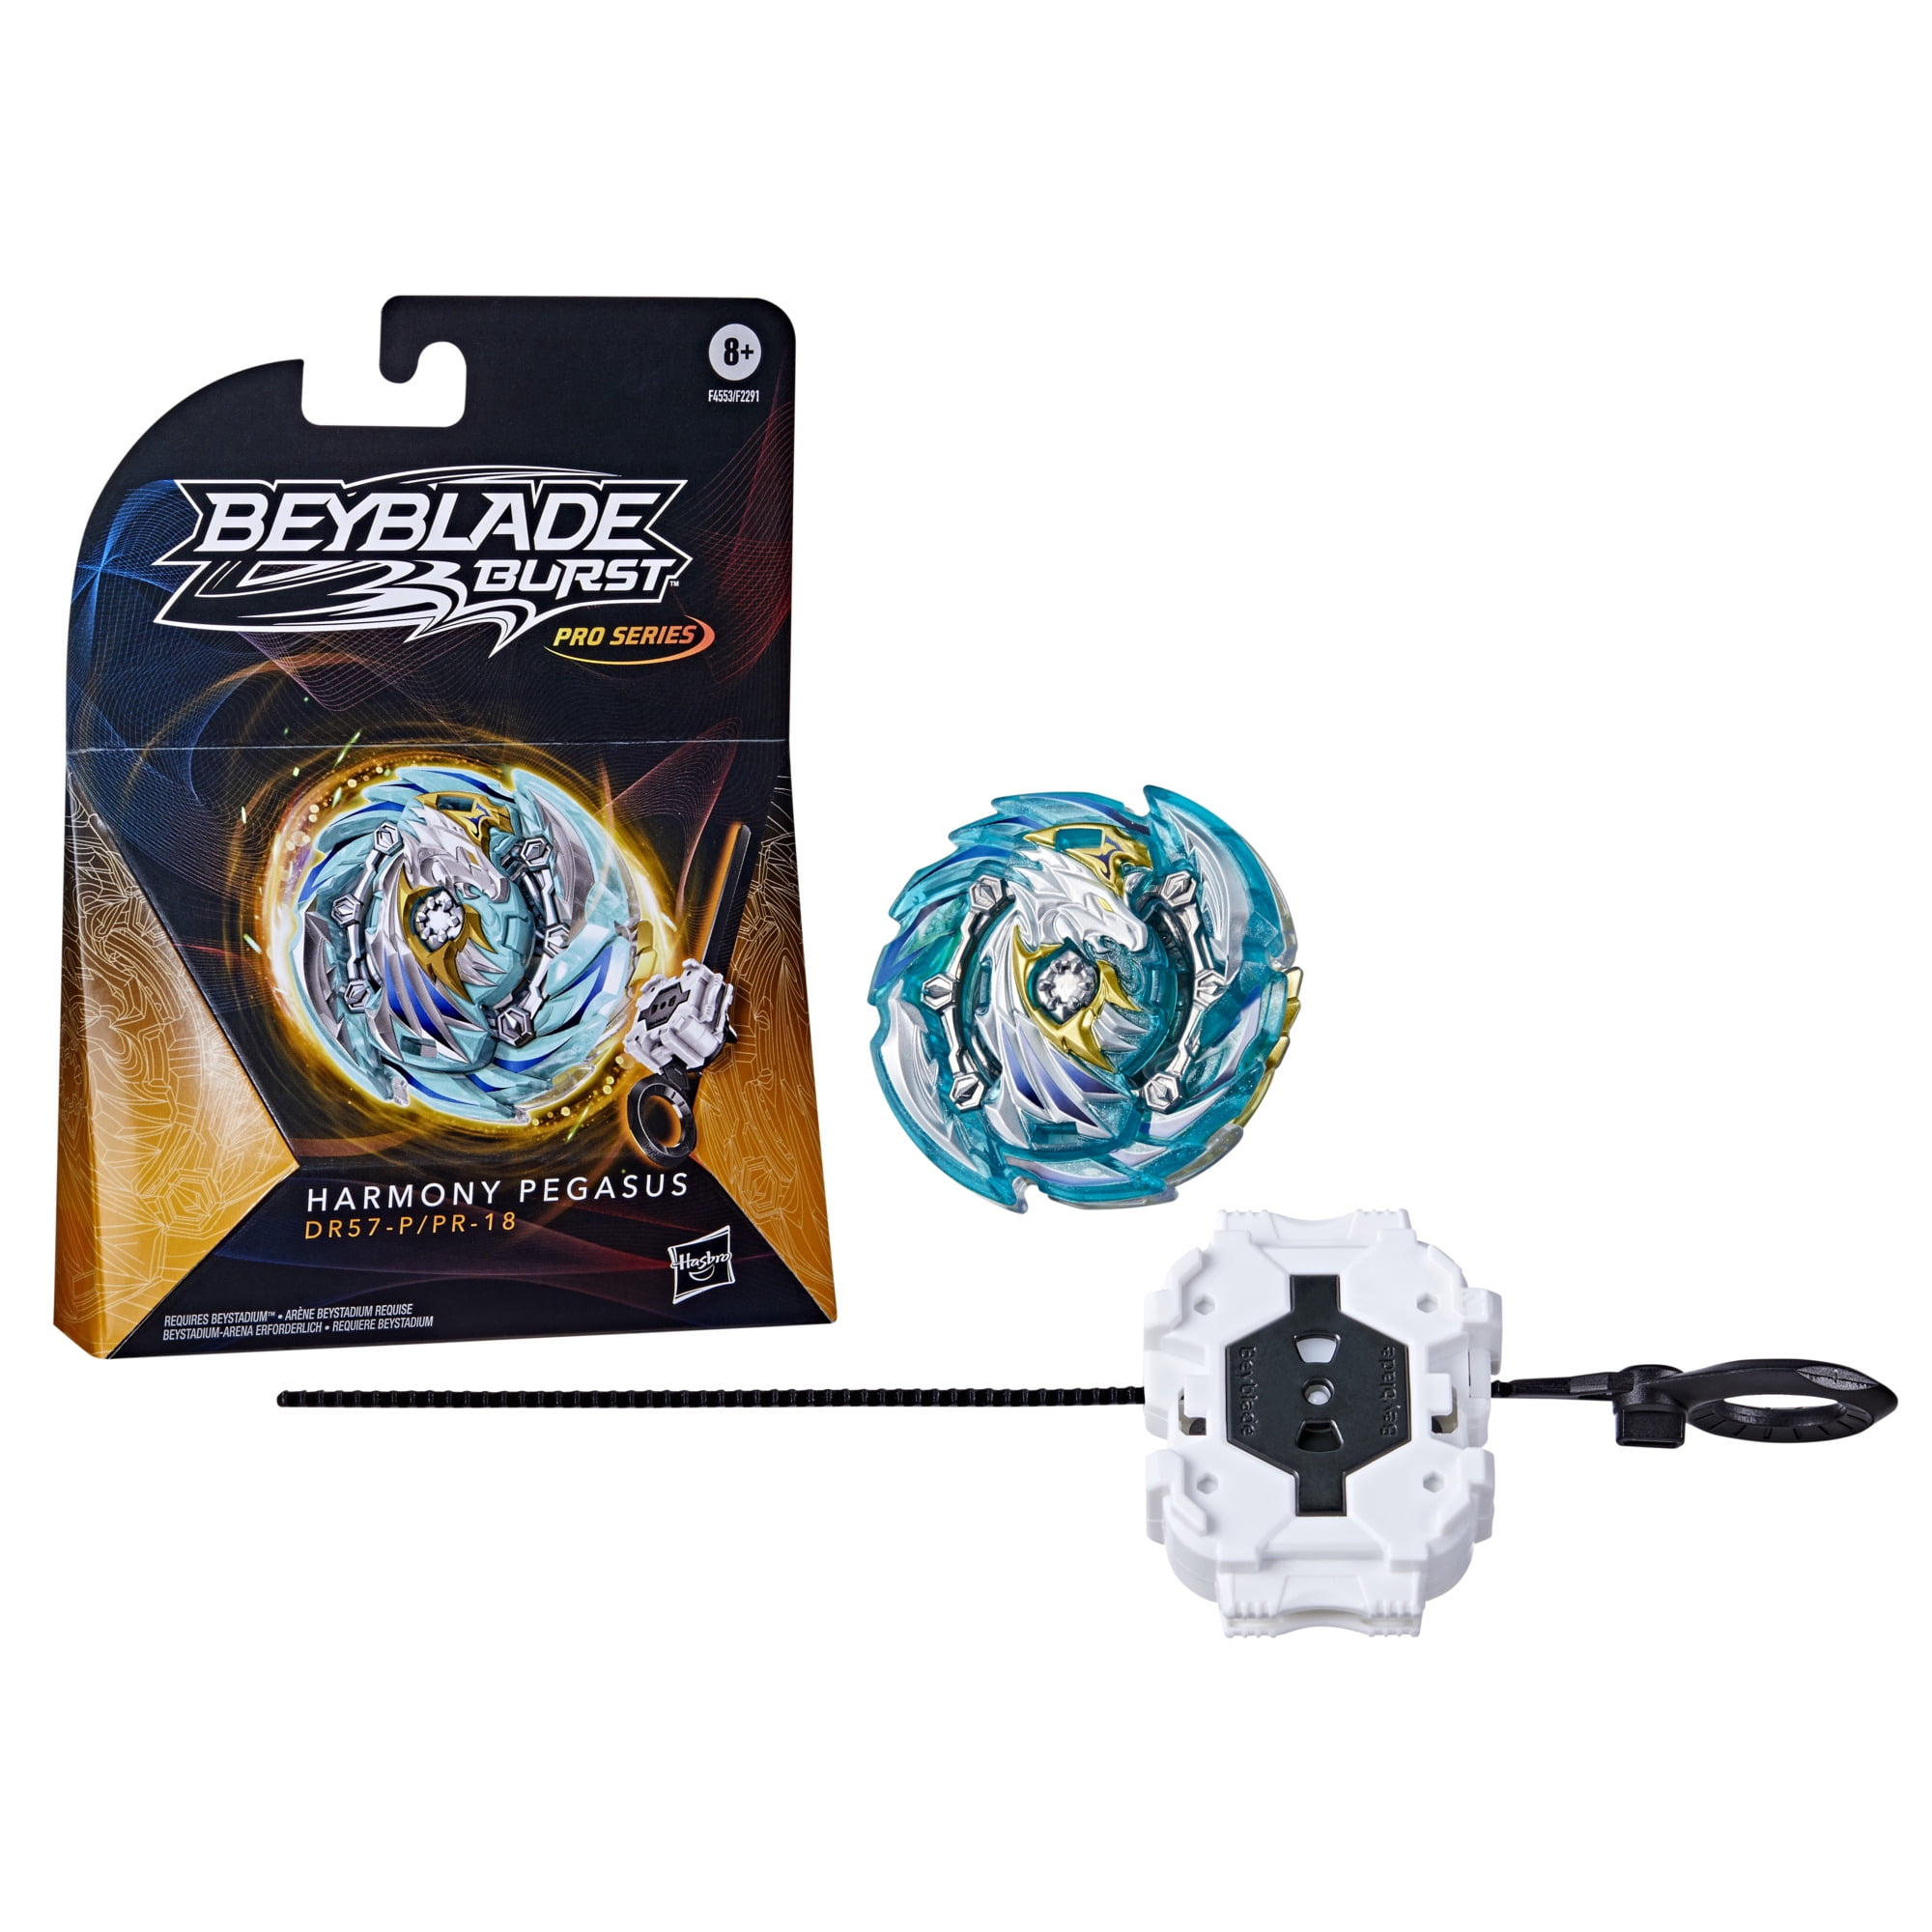 Beyblade Burst Pro Series Harmony Pegasus Spinning Top Starter Pack,  Includes Launcher 